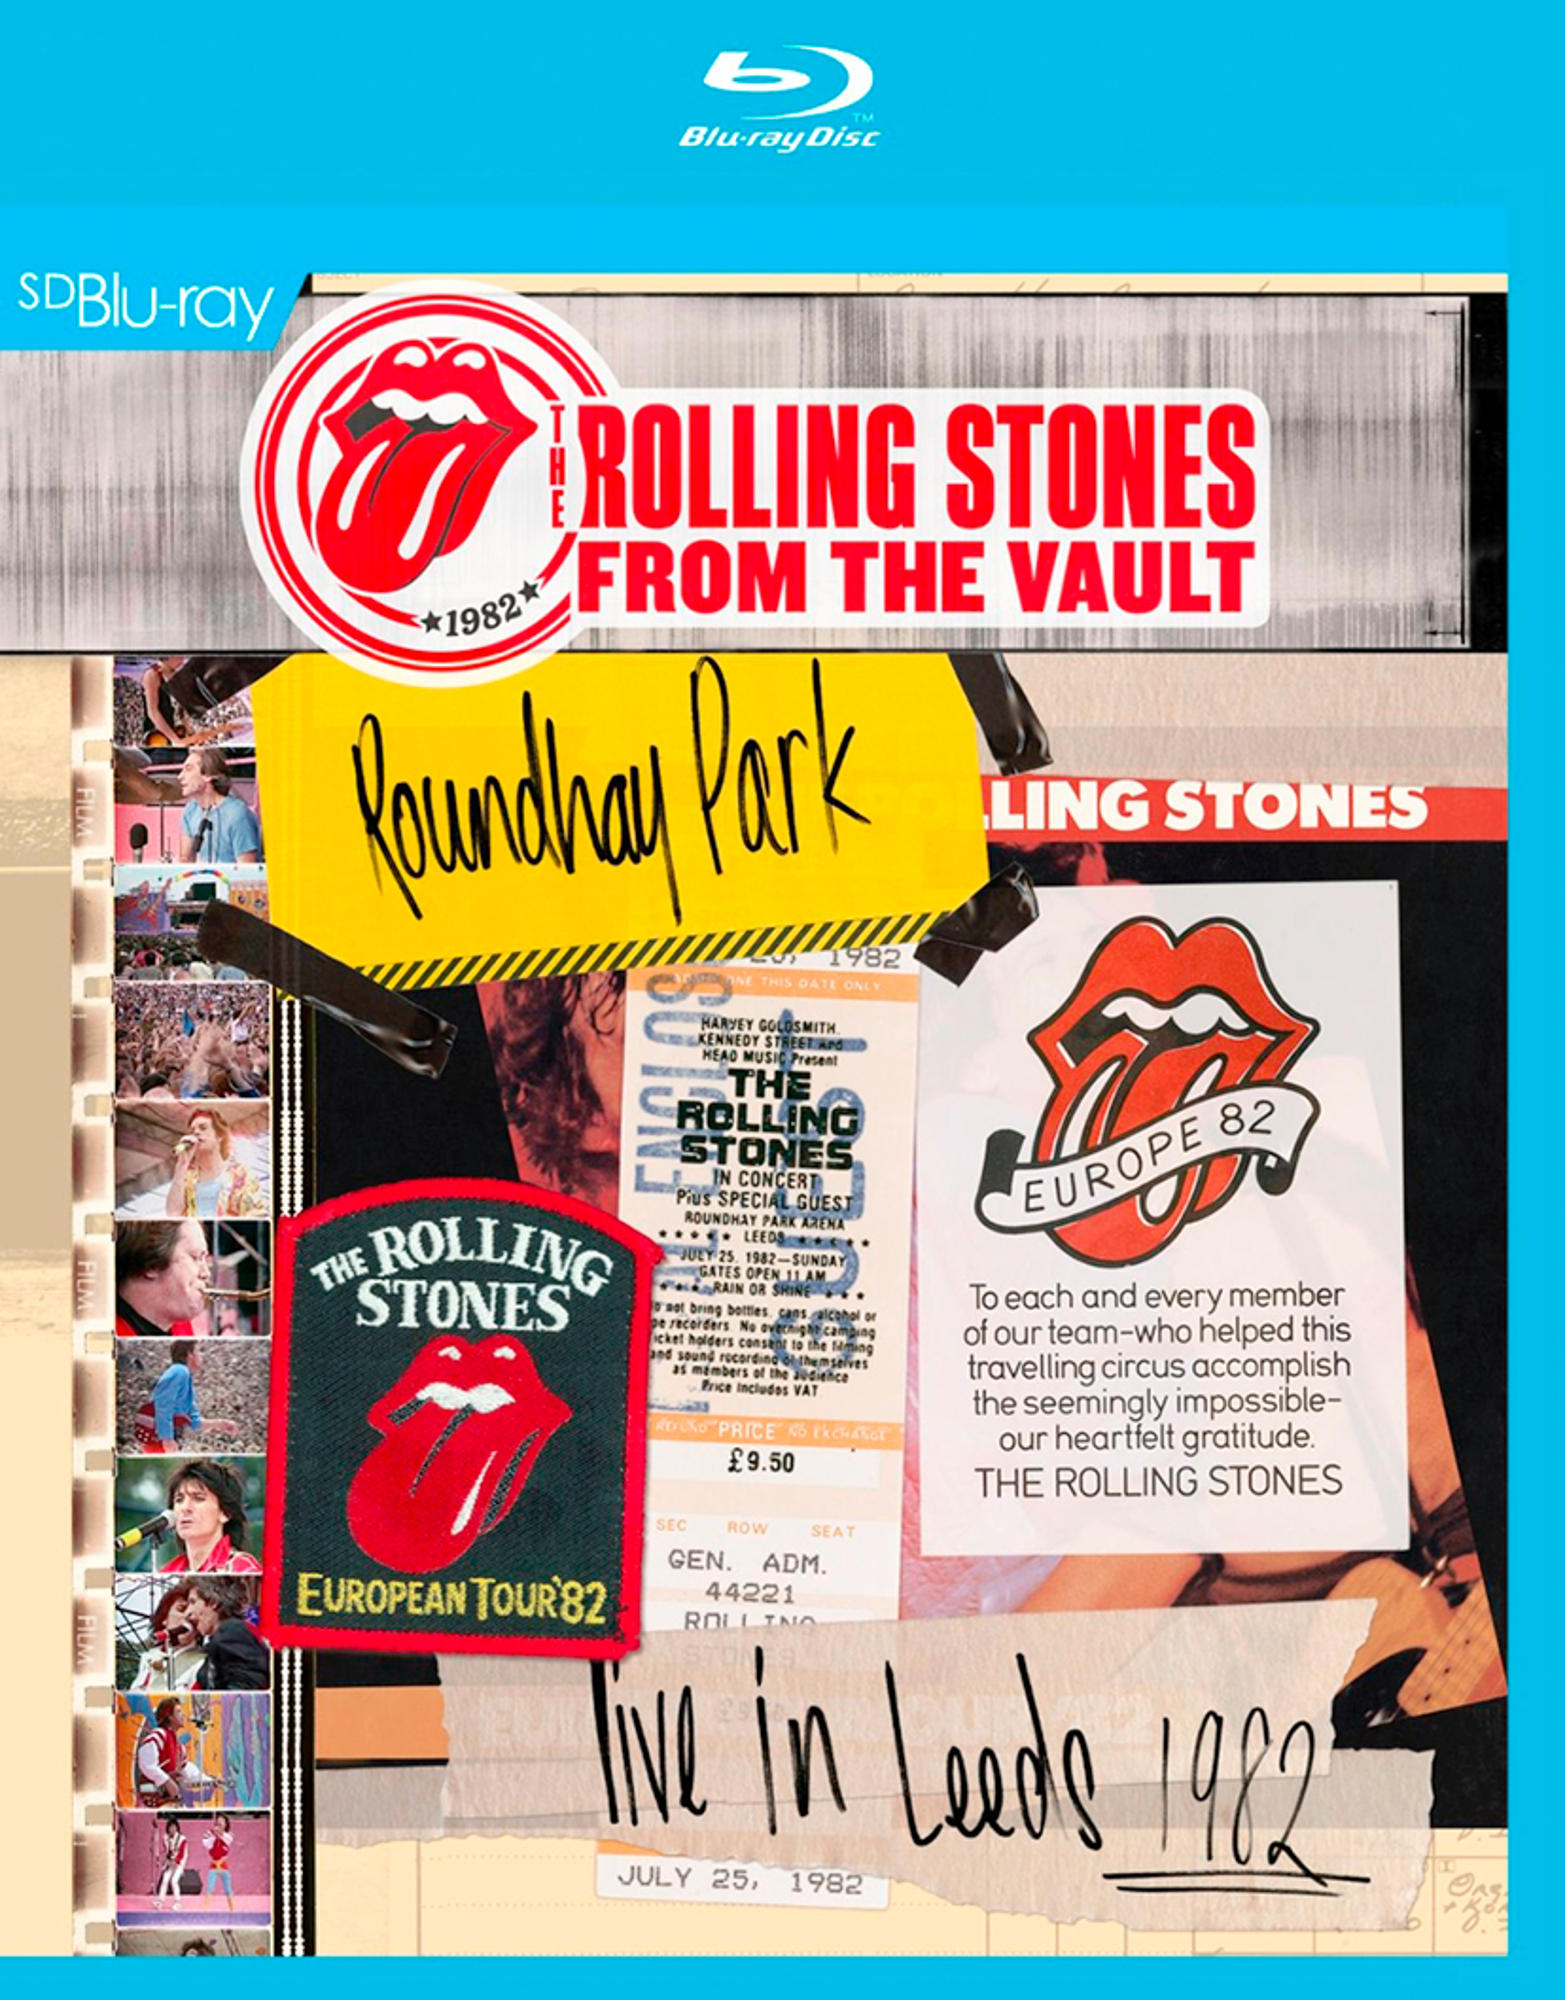 From Leeds Stones 1982 The (Blu-ray) - Rolling - Vault-Live In The